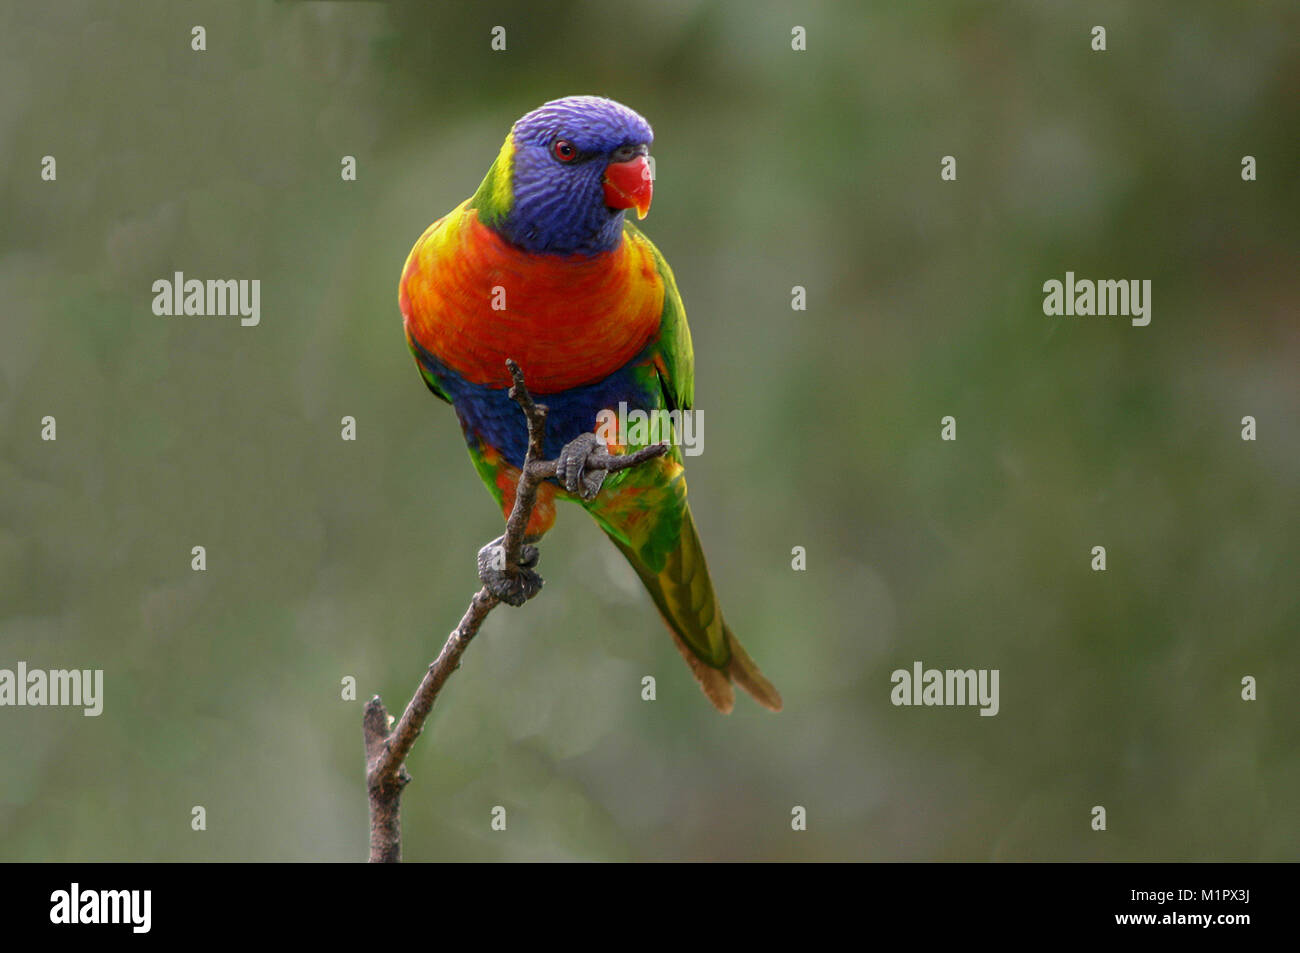 A rainbow lorikeet in the classic perched on a twig pose. The soft background is created by soft light filtering through gum trees. Stock Photo